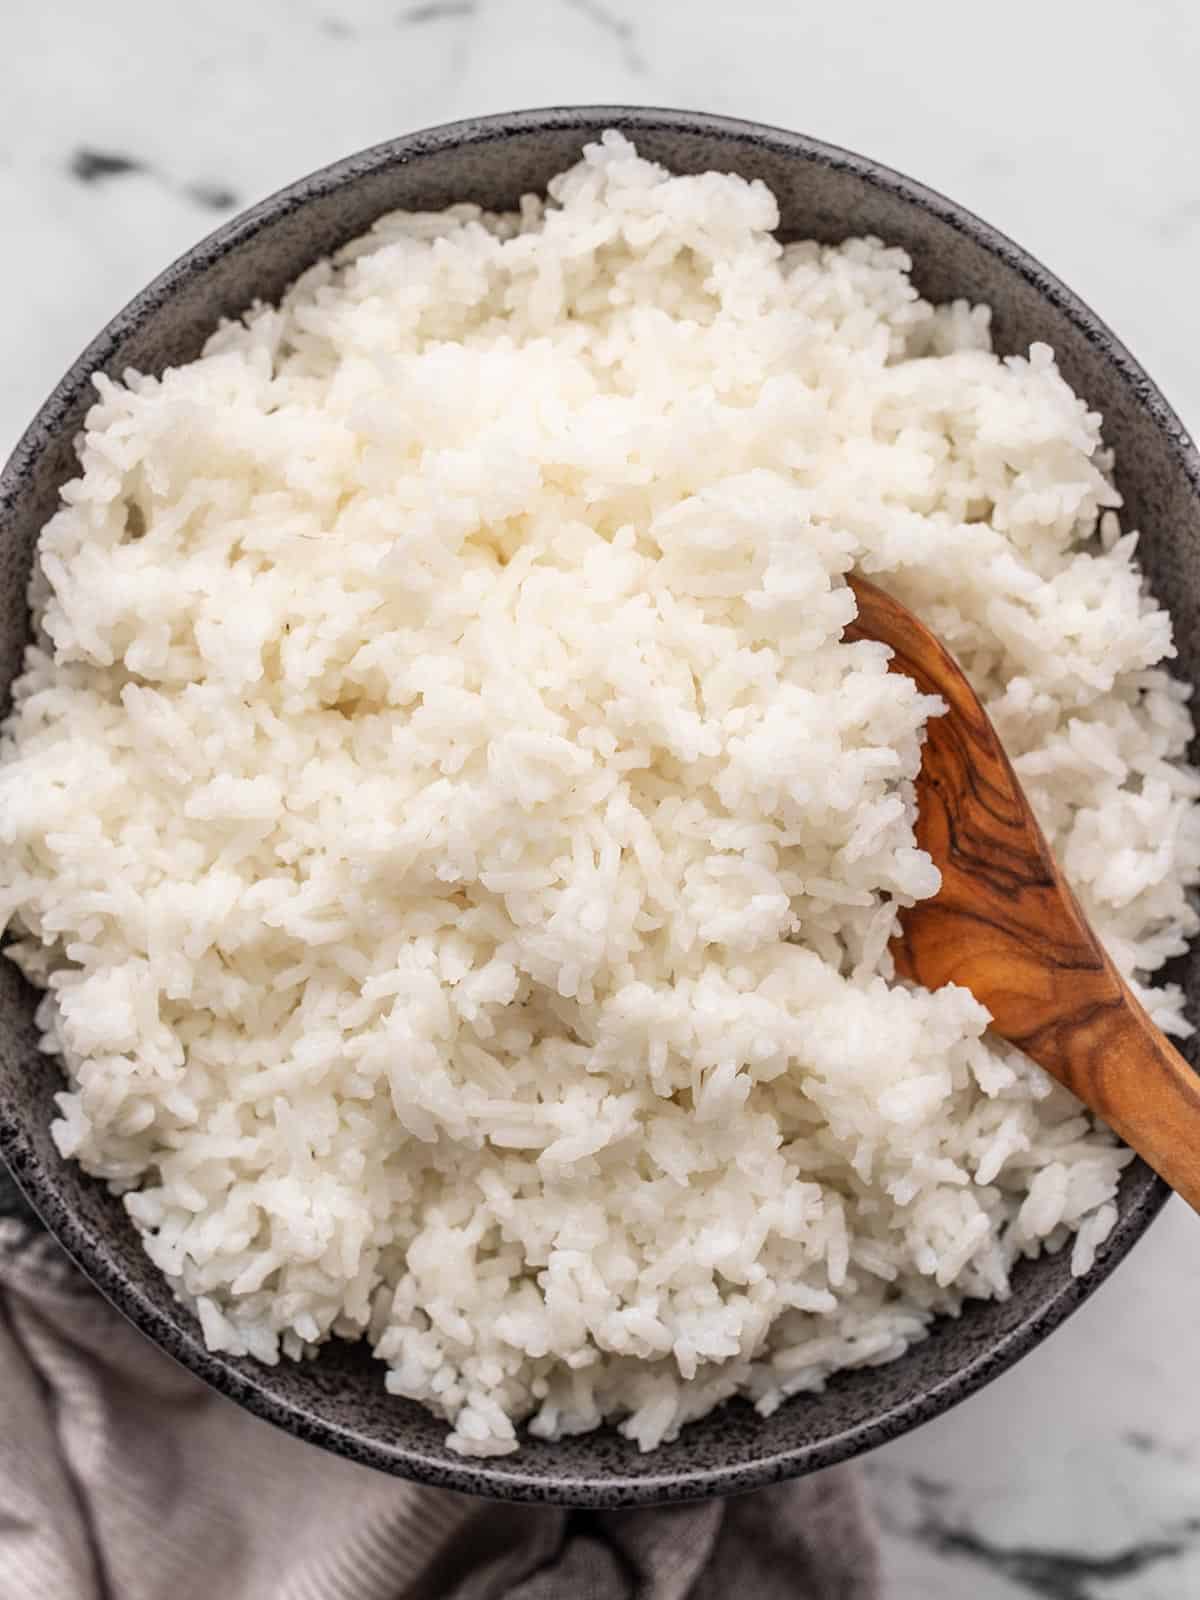 Cooked rice in a bowl with a wooden spoon.